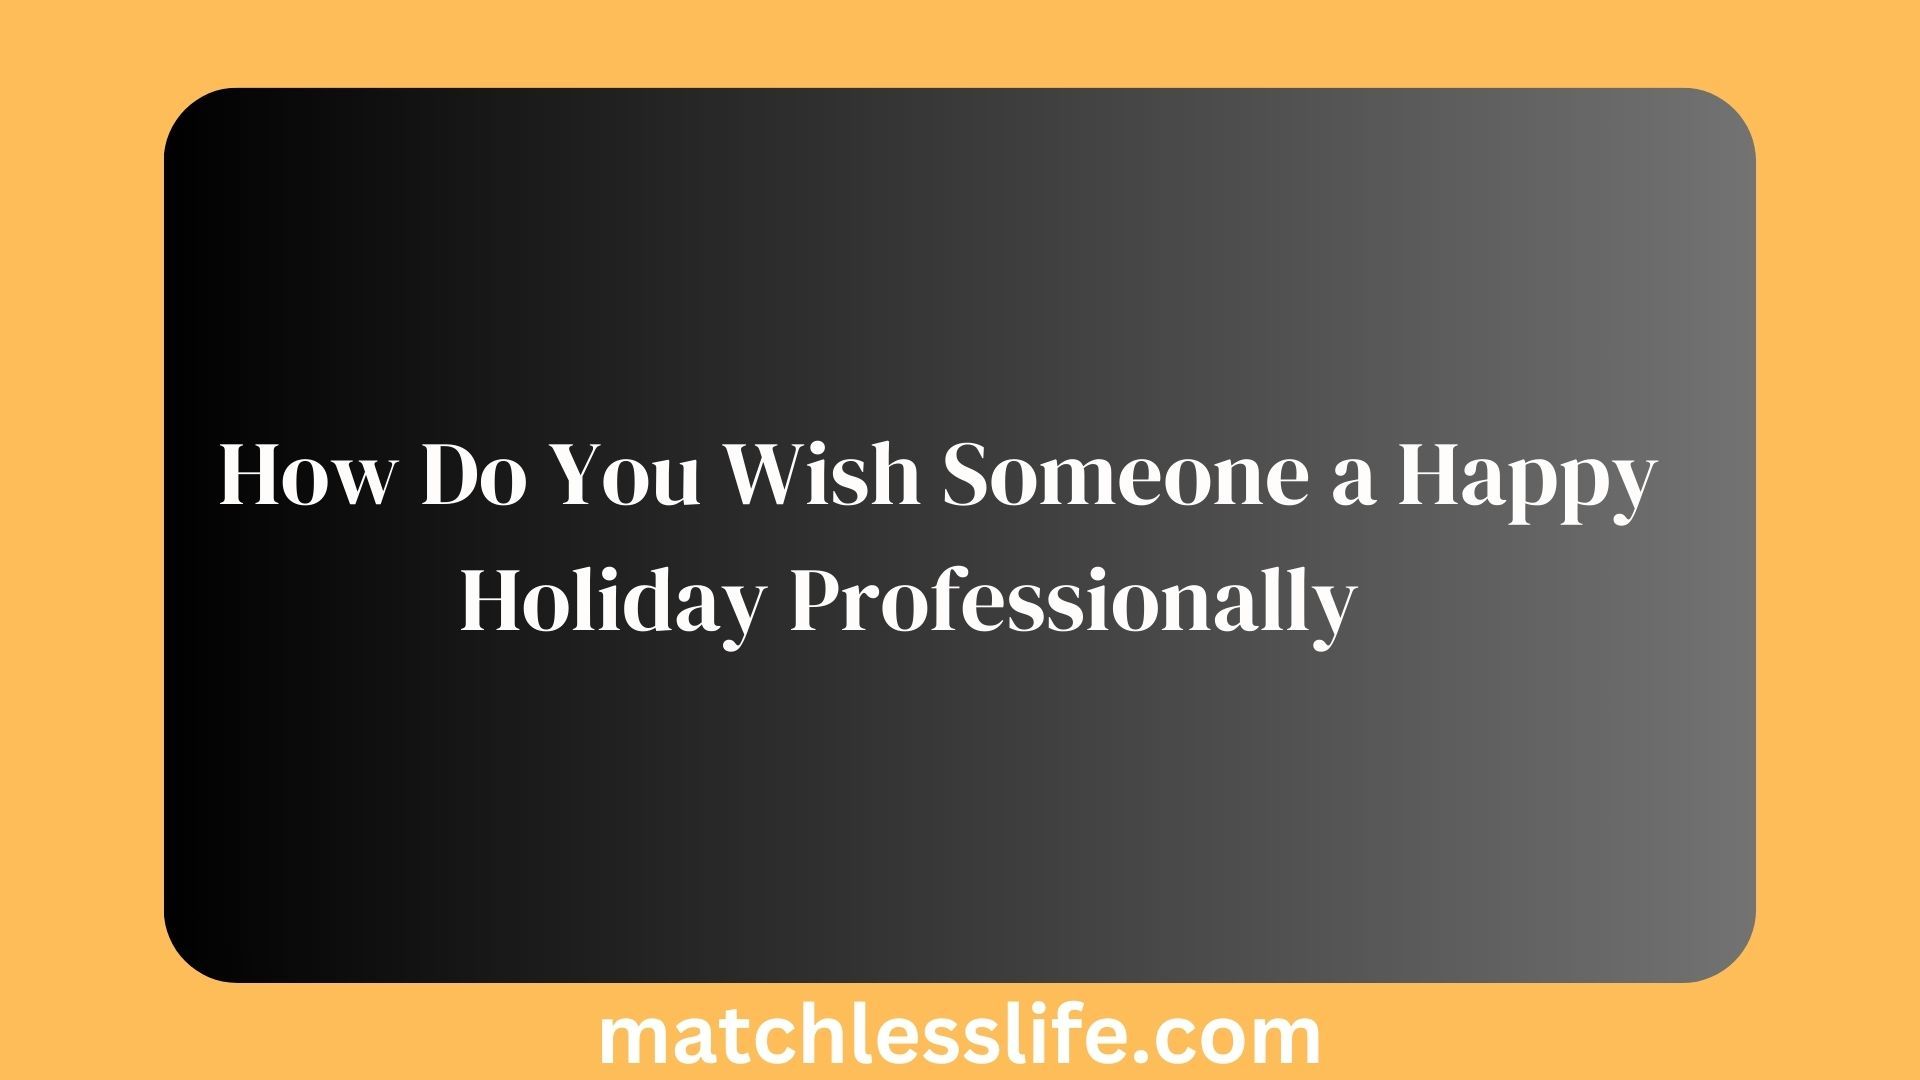 How Do You Wish Someone a Happy Holiday Professionally